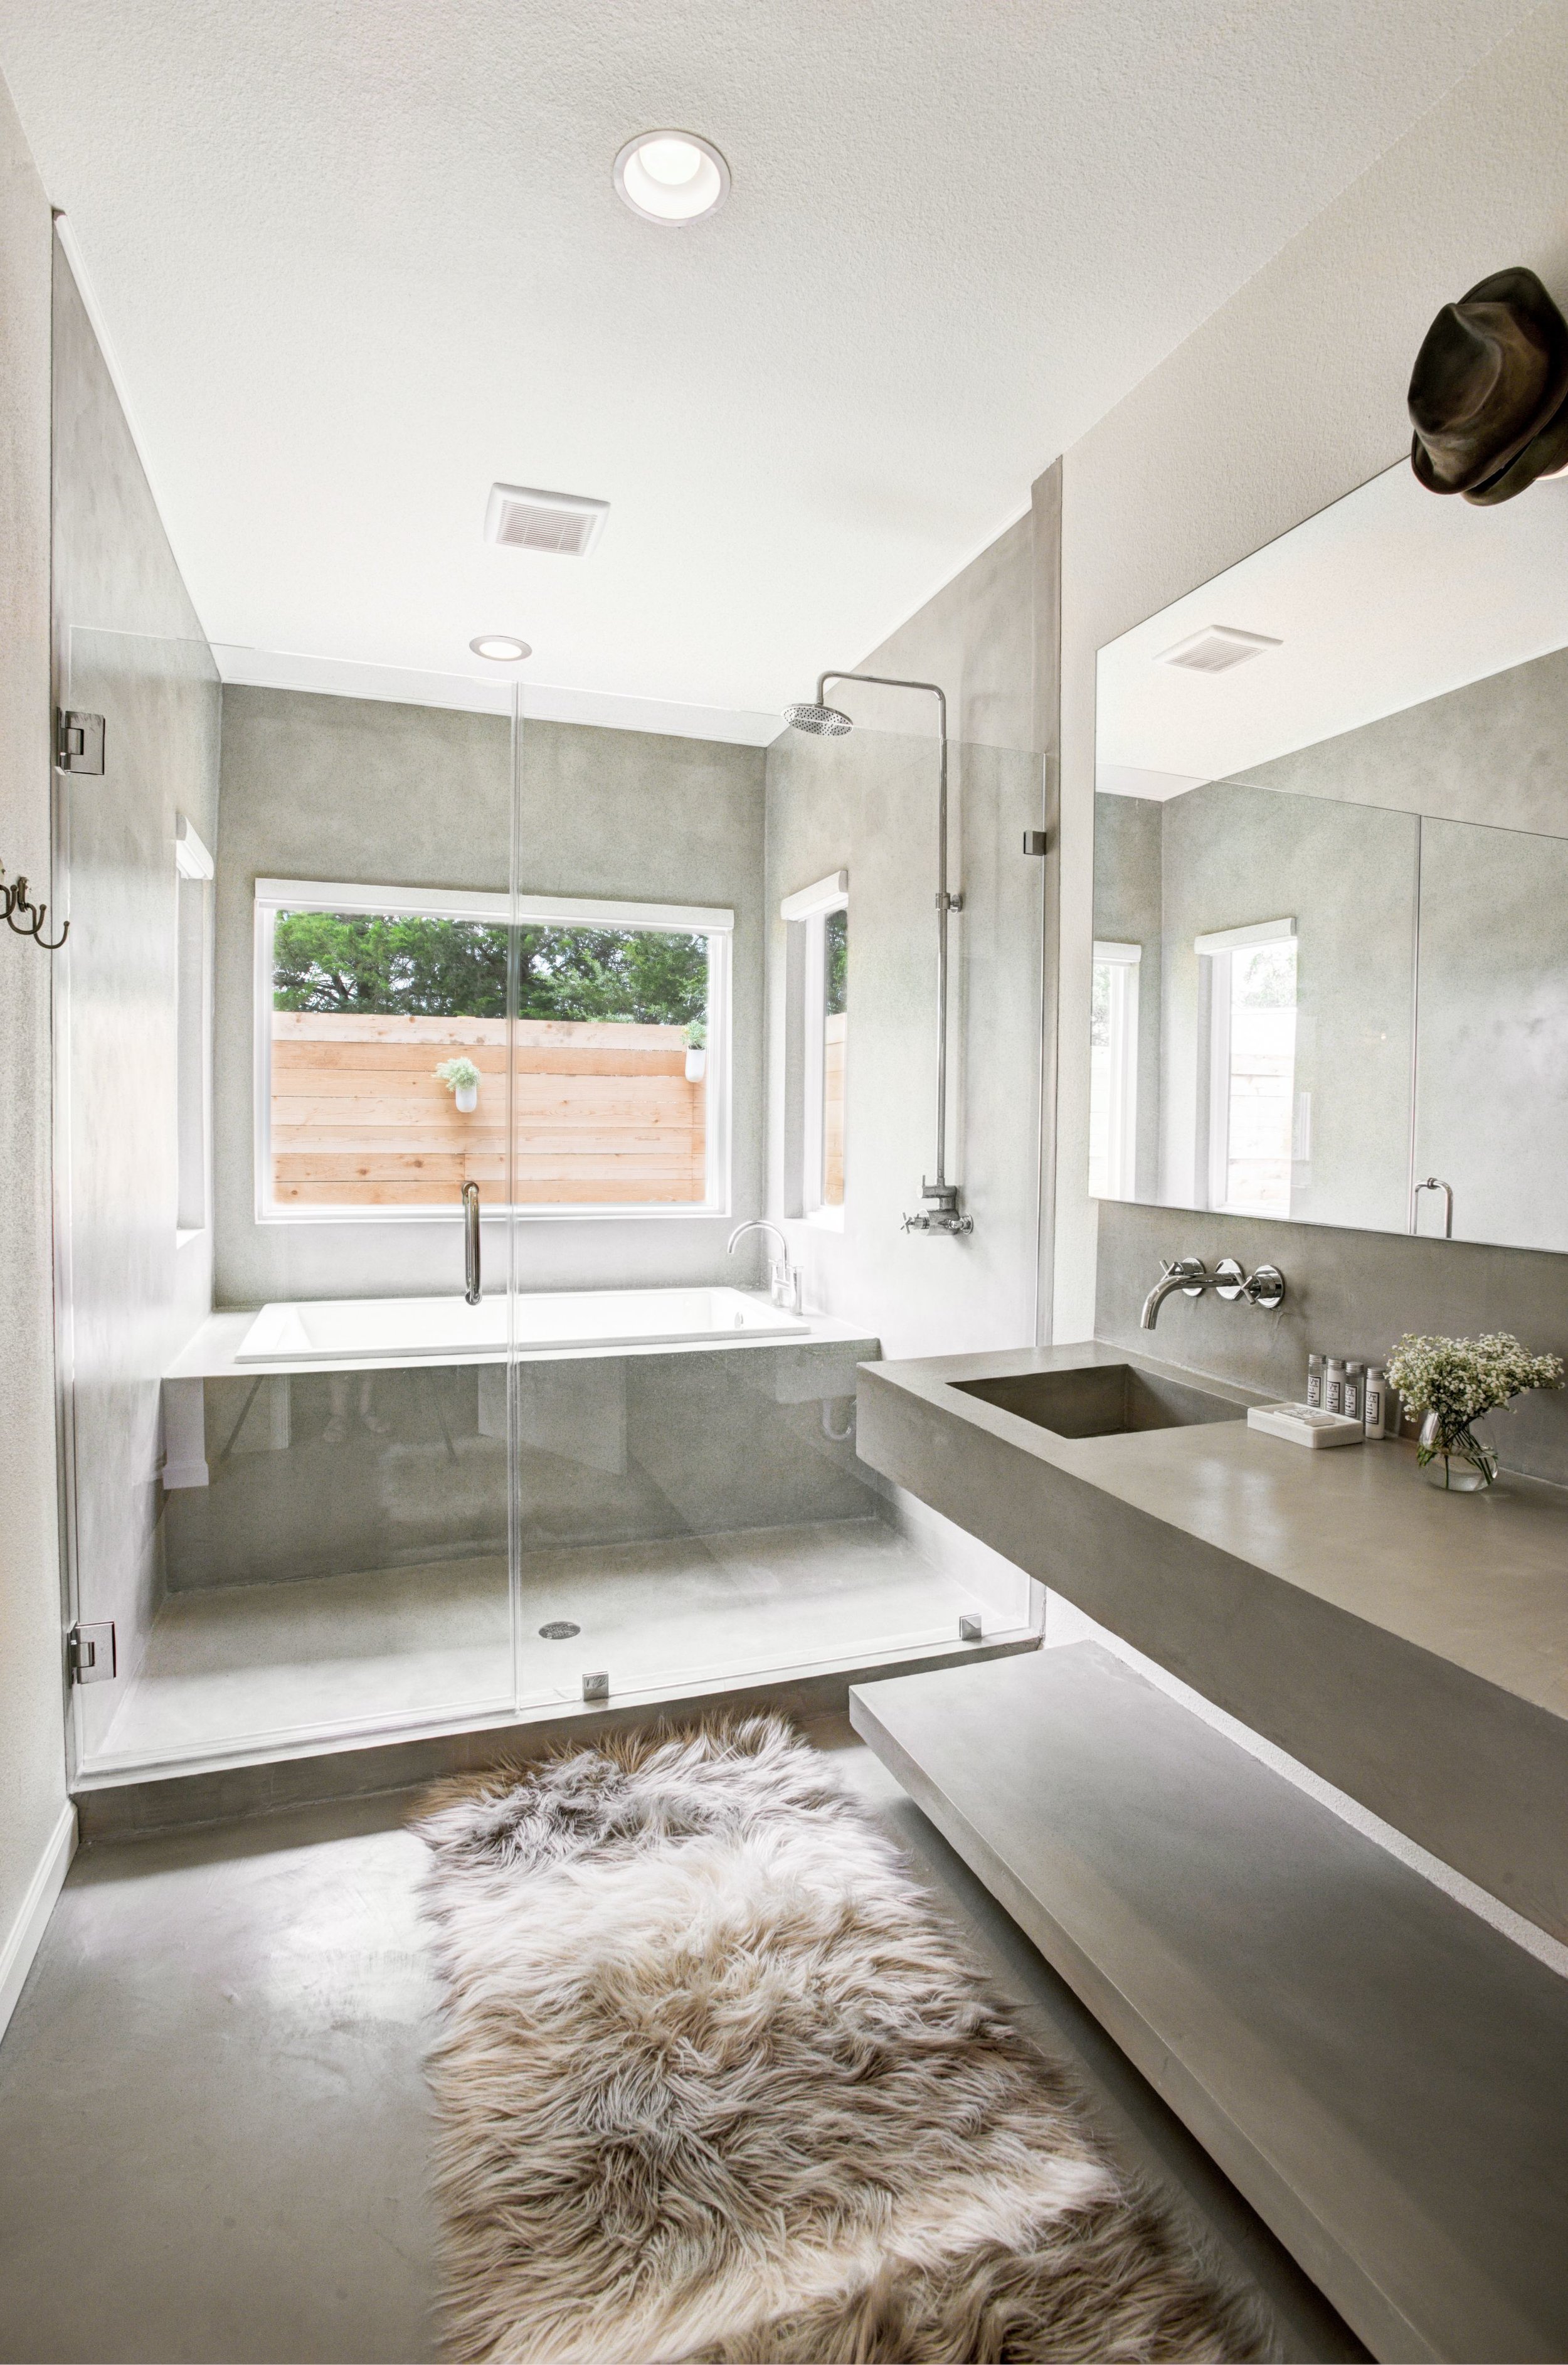   The Boho master bath features a soaking tub and separate shower.  